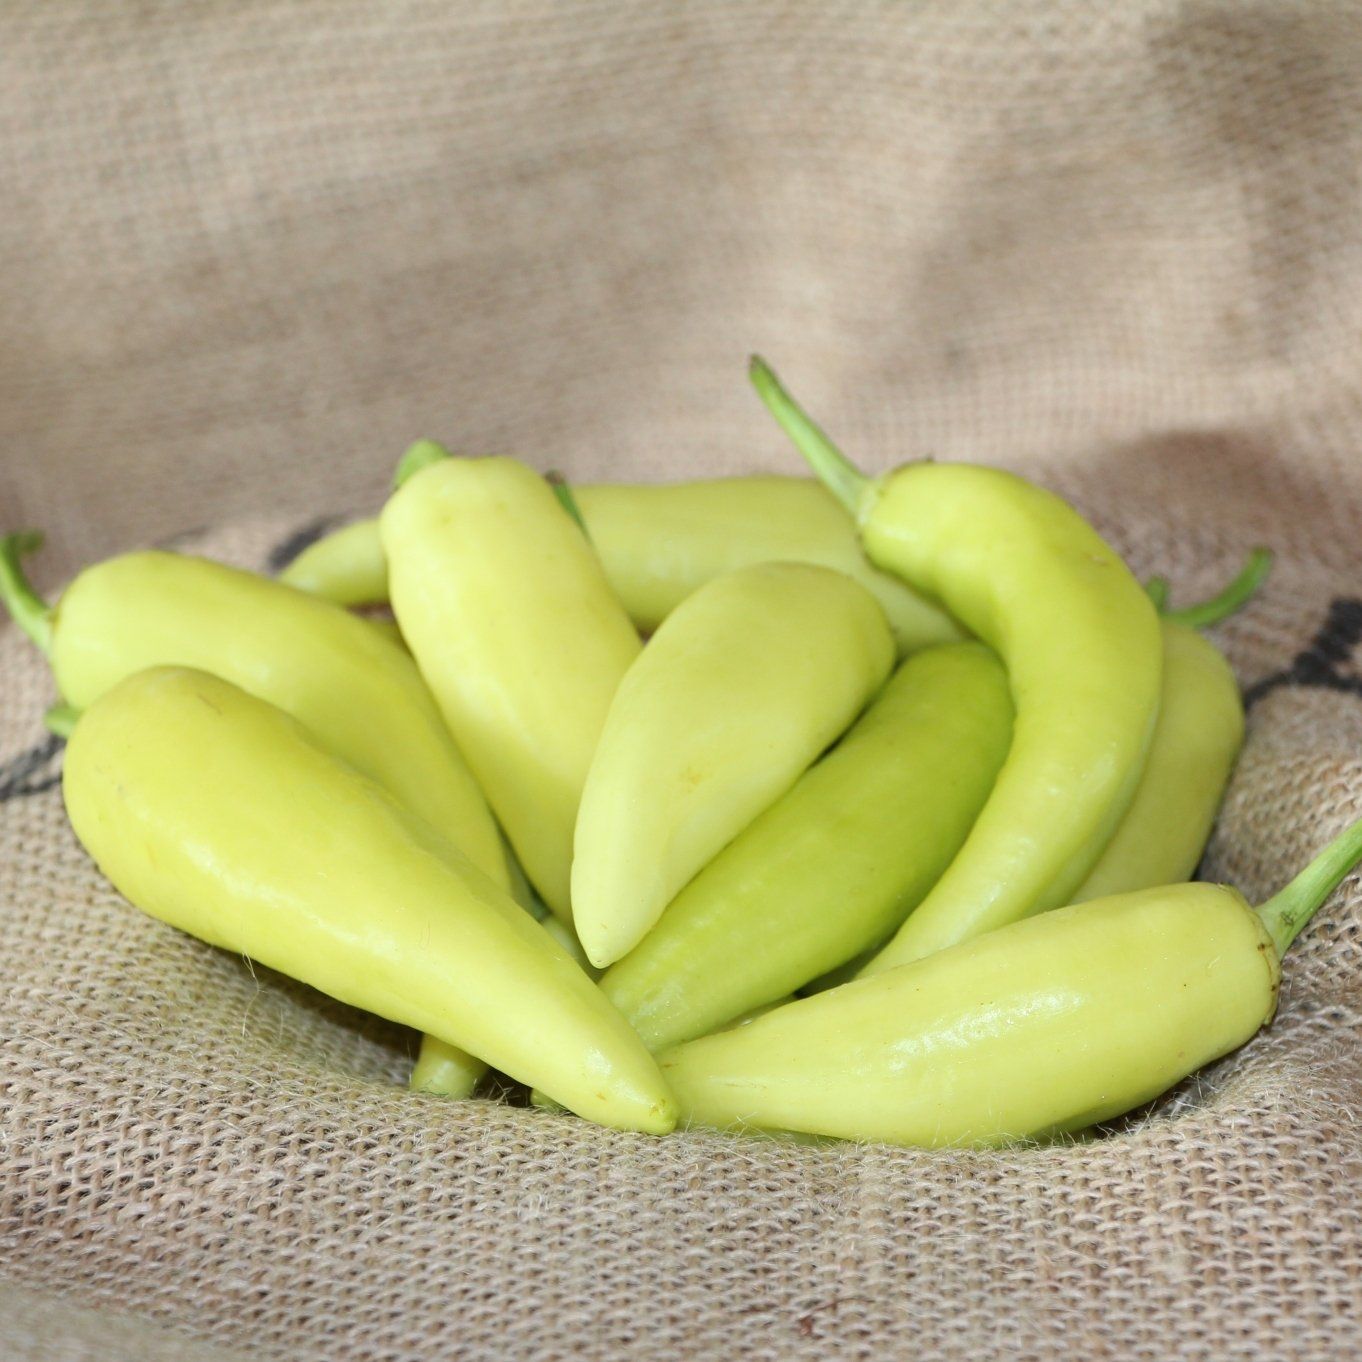 locally grown banana peppers